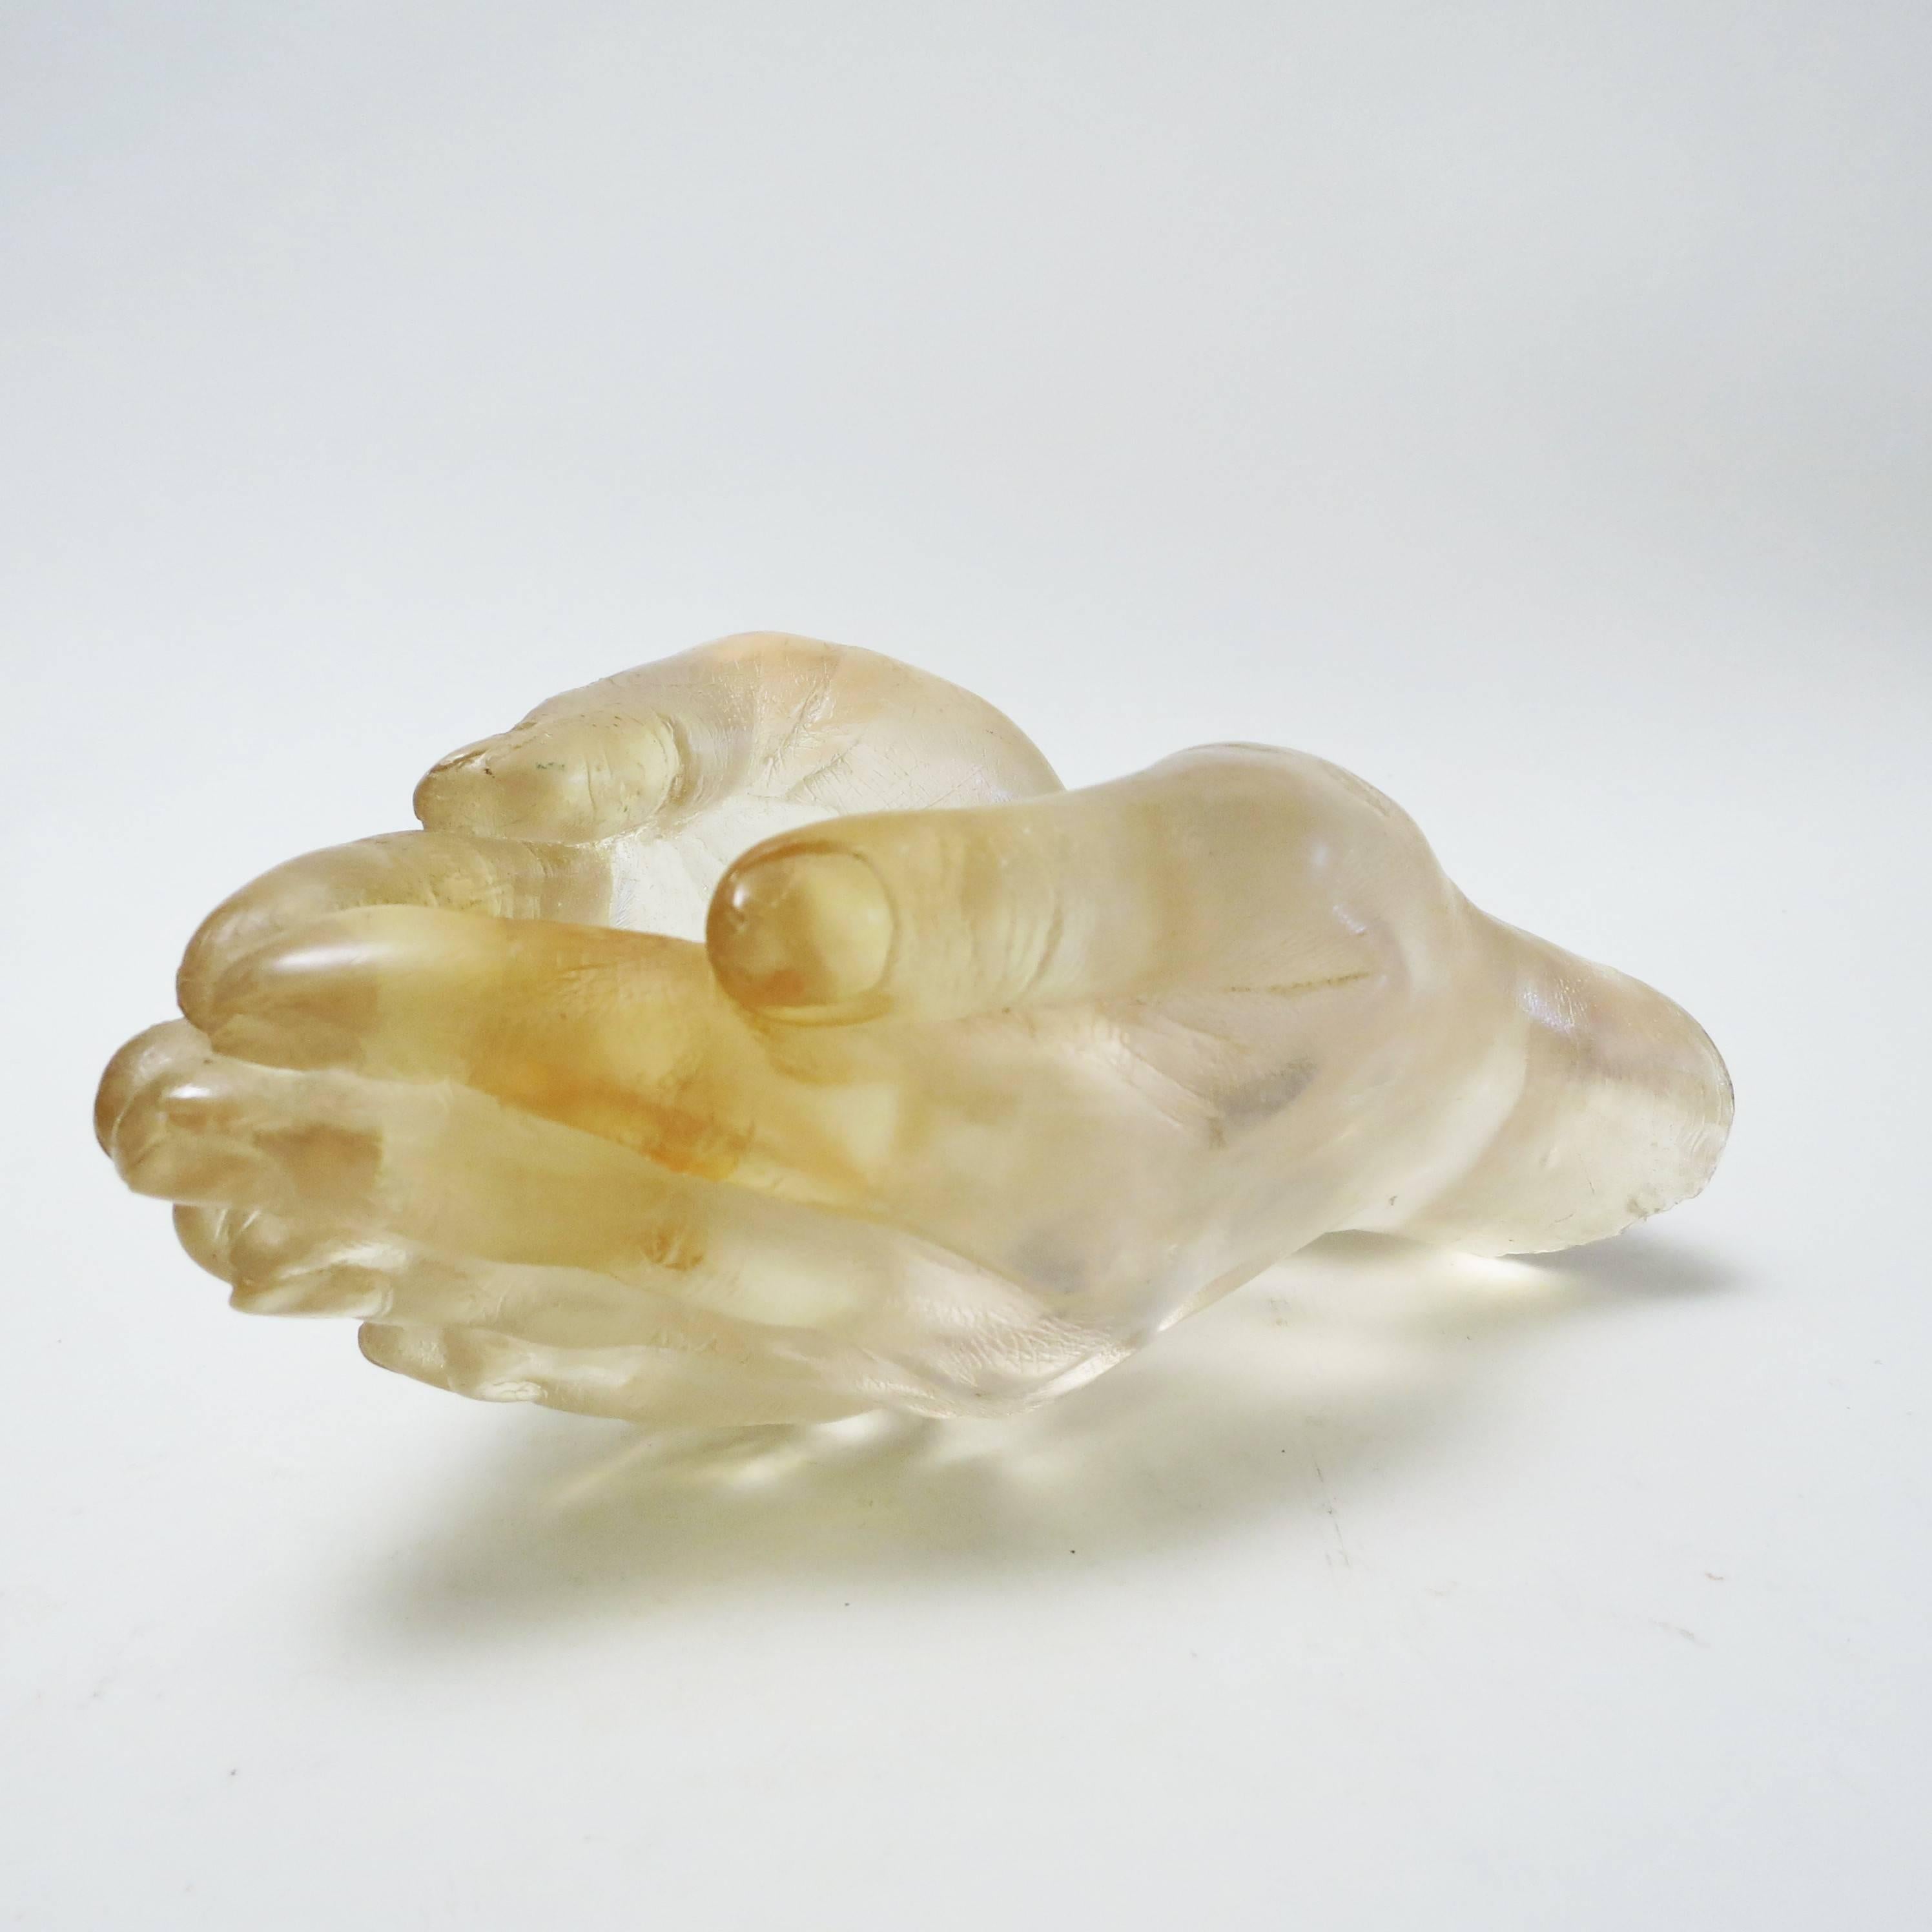 A two hands shaped sculpture in pale yellow colored resin attributed to Pierre Giraudon, France, circa 1968.
The sculpture can take several position and can also be used as a bowl or a vide-poche. 
It is a cast of real hands where fingerprints